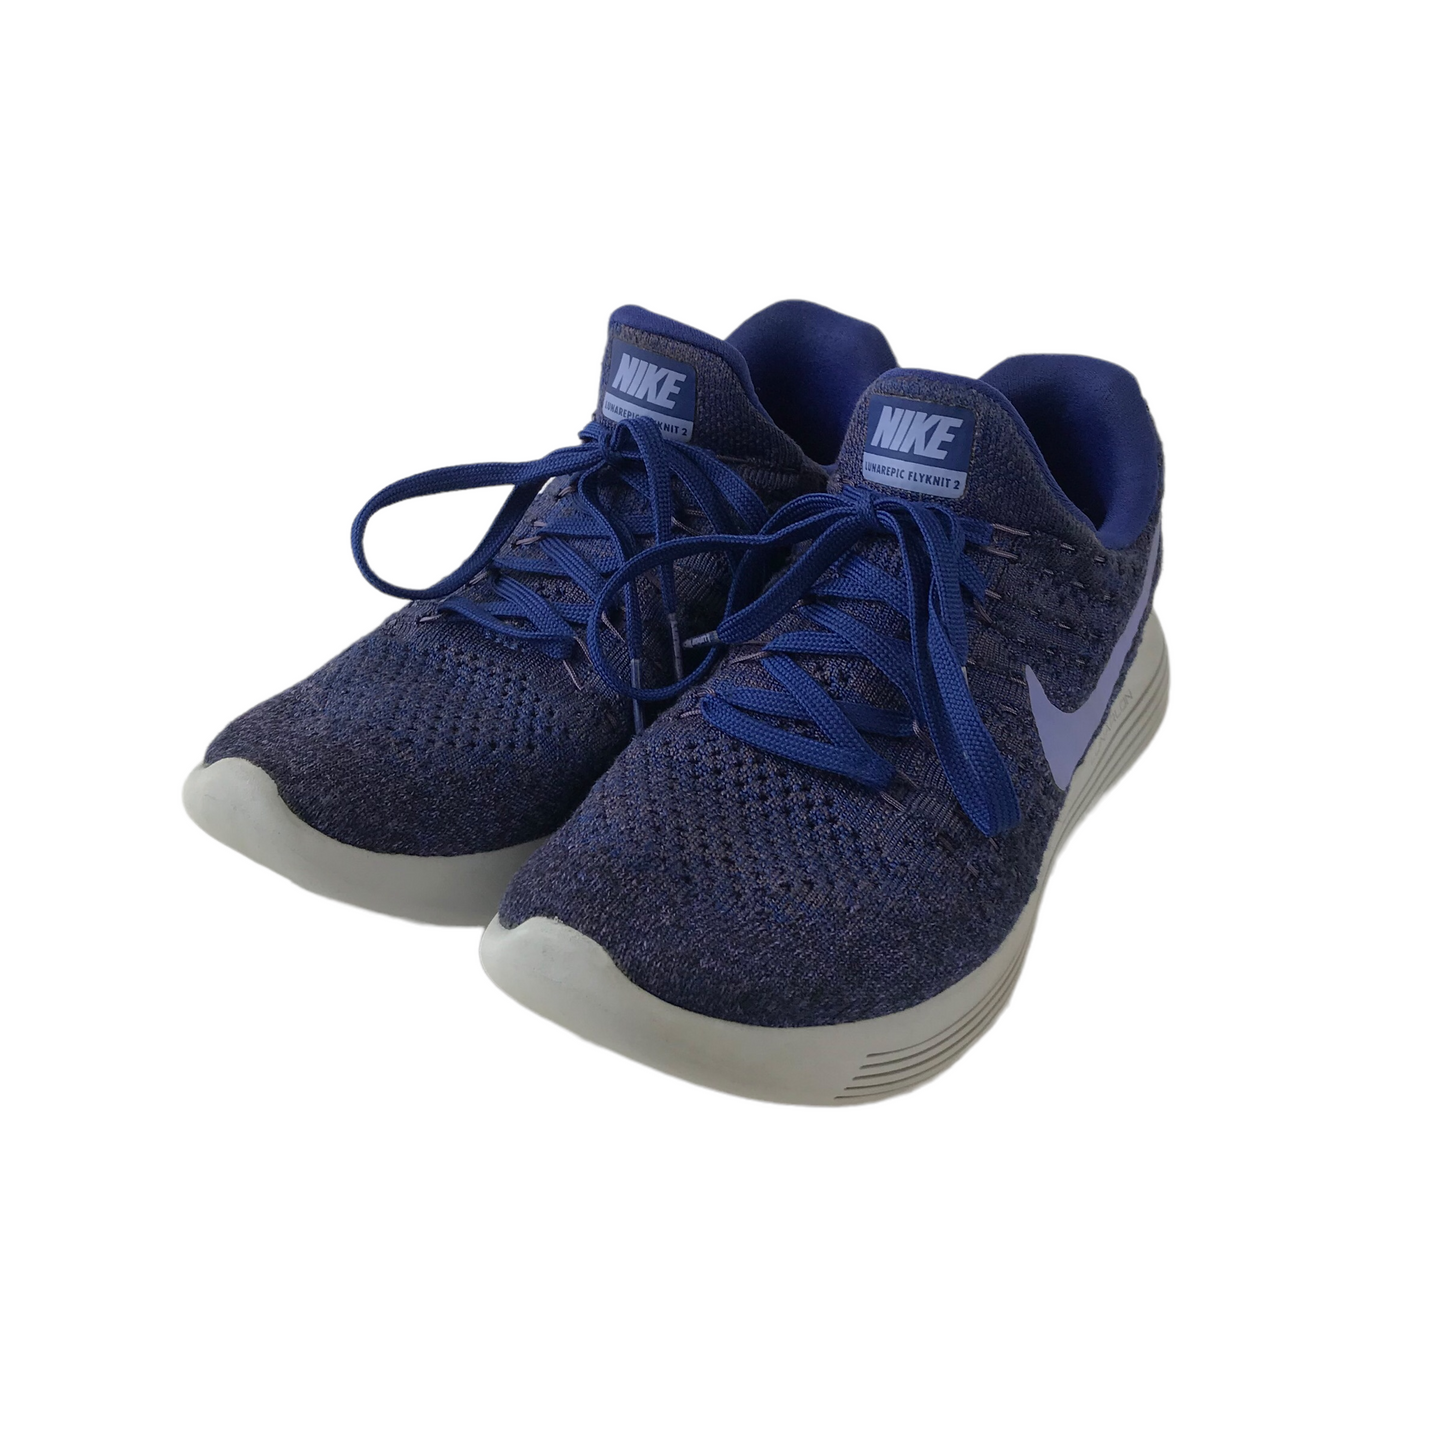 Nike Lunarepic Flyknit 2 Blue and purple Trainers Size UK 4